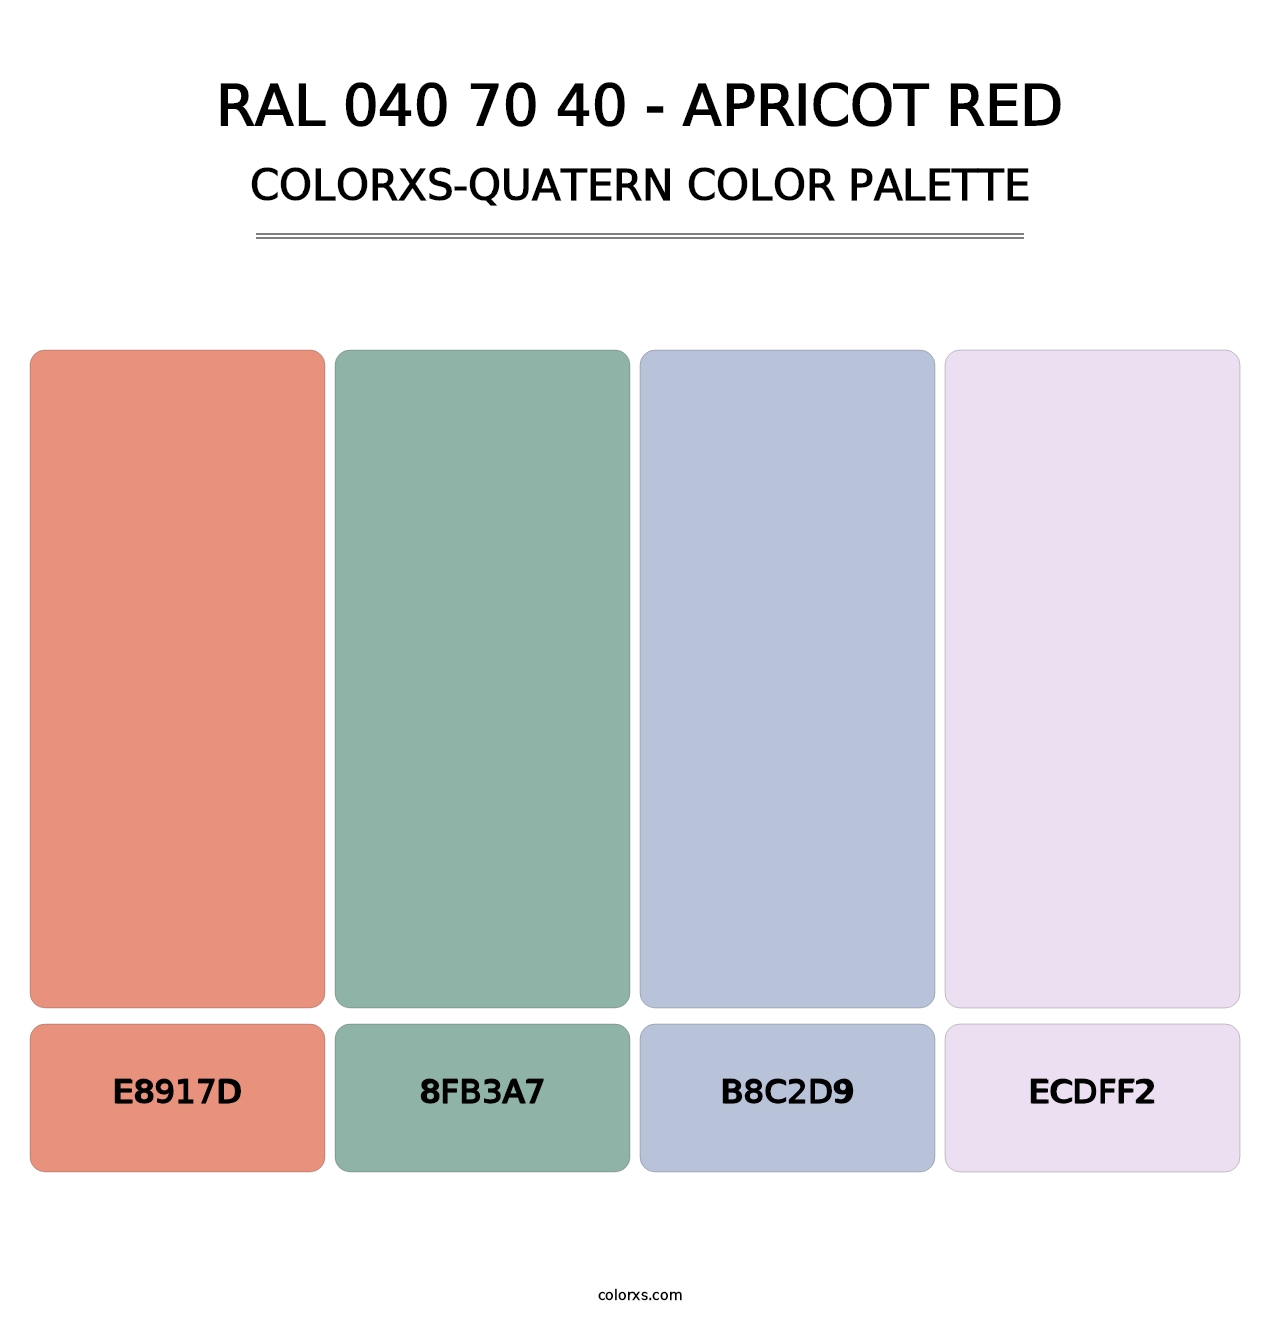 RAL 040 70 40 - Apricot Red - Colorxs Quatern Palette